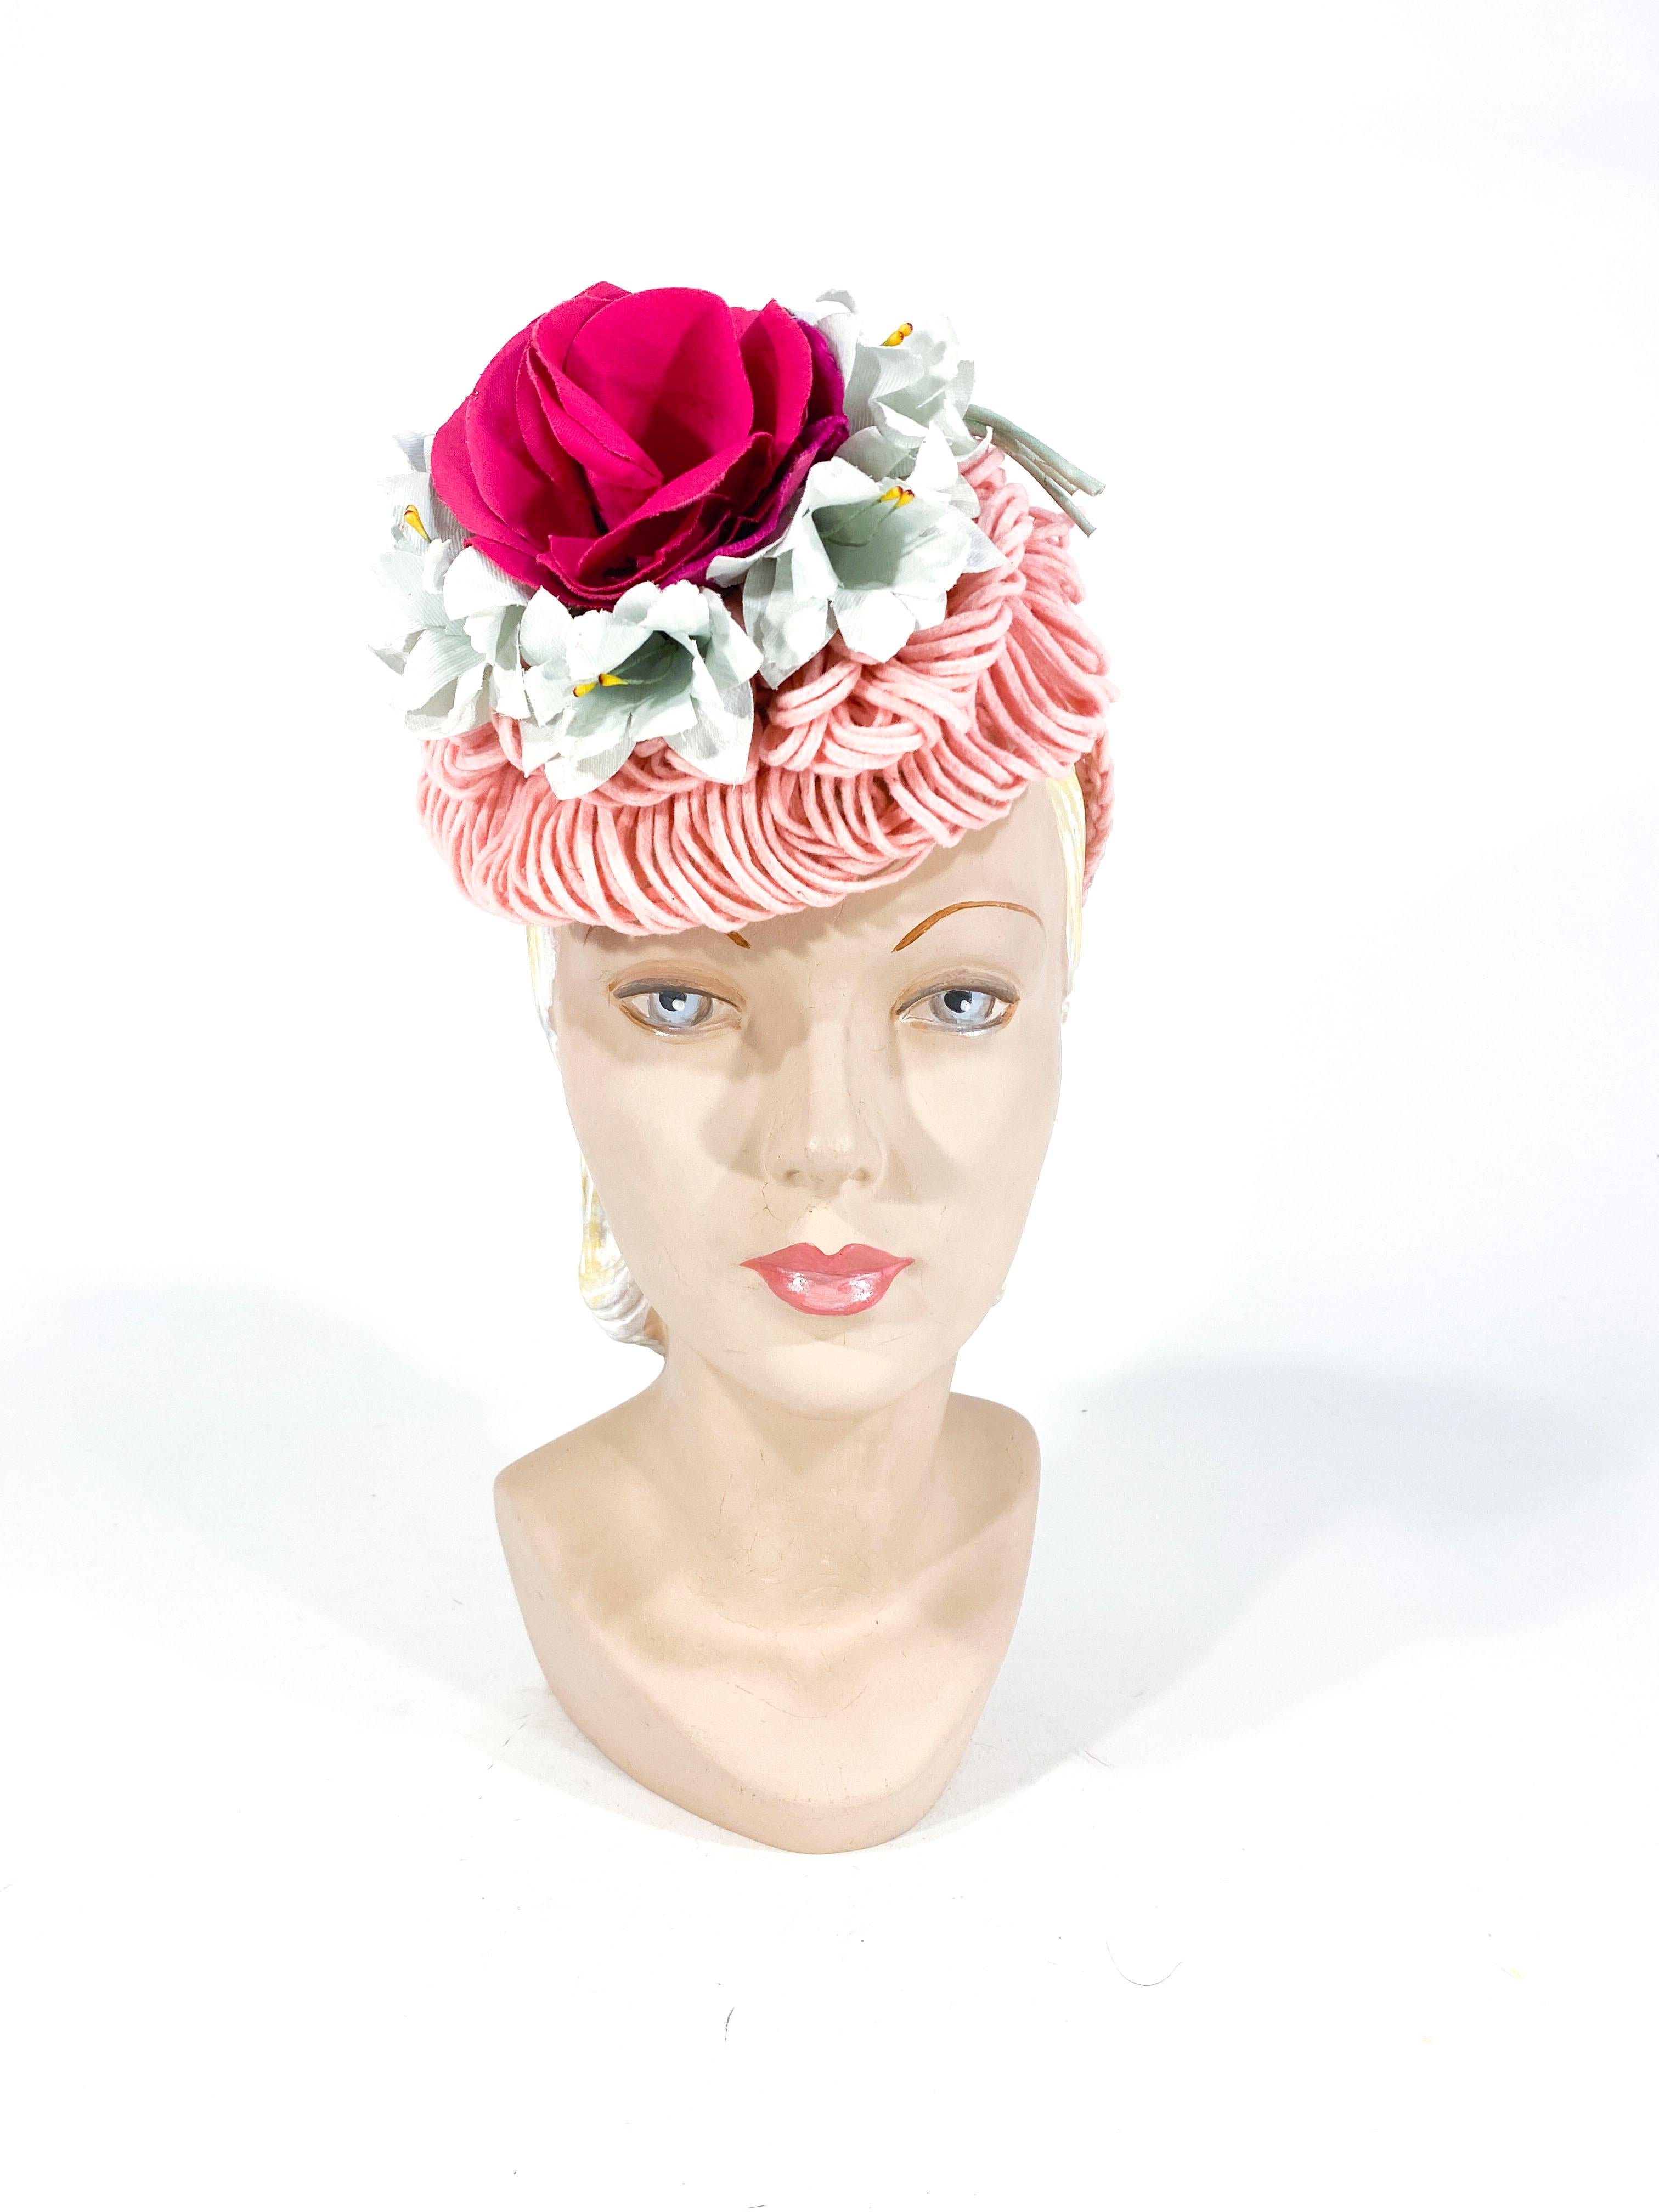 1940's handmade rose pink crochet wool cocktail hat with layers of wool loops, pale blue flowers, and centered with a large dark silk rose with velvet petals. The security ring fixes the hat on to the head and is covered with decorative crochet. 